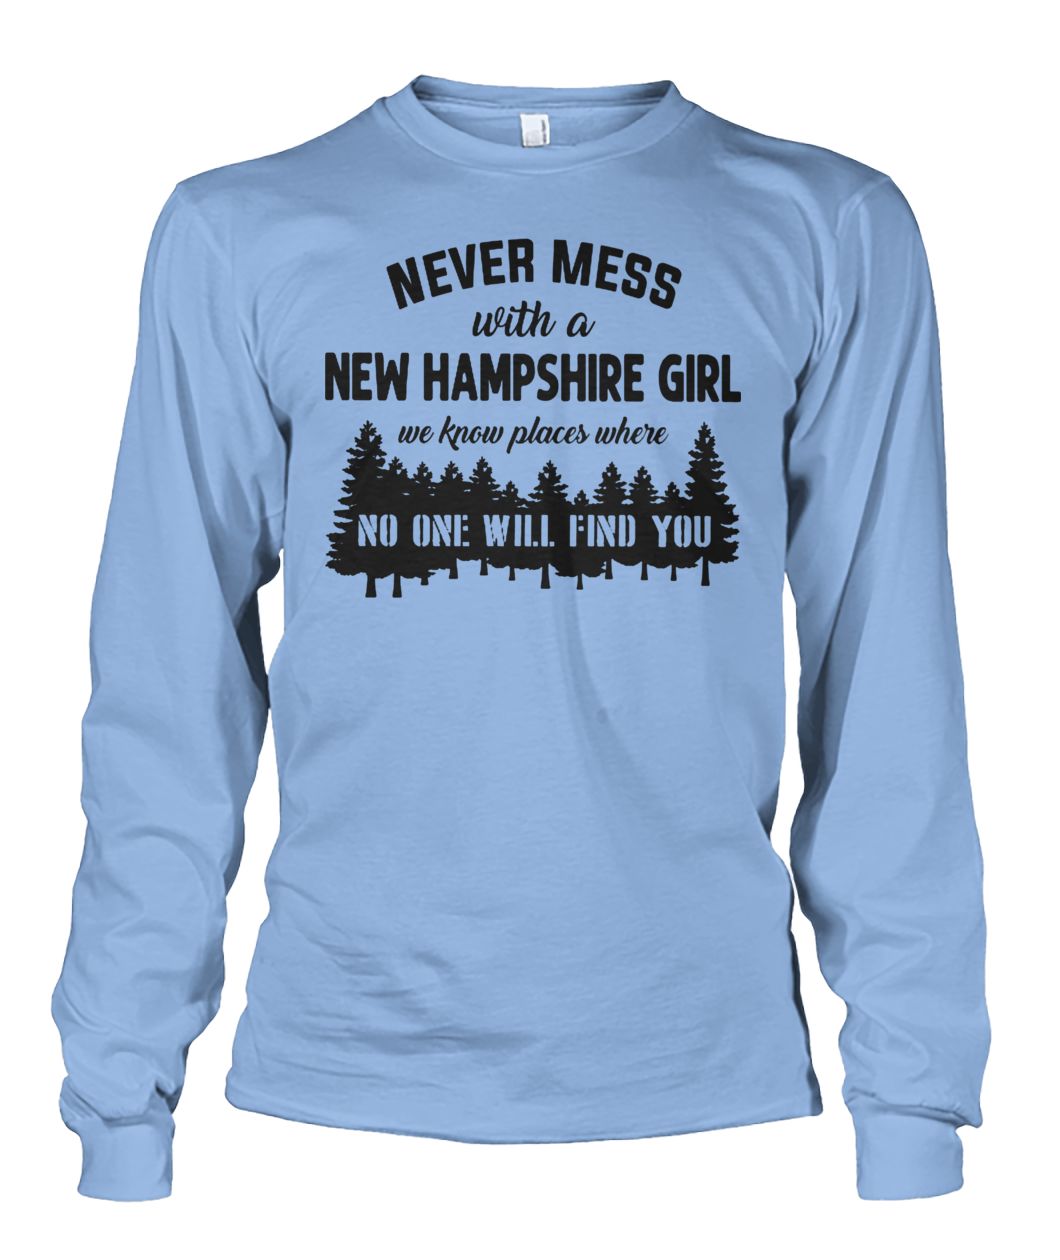 Never mess with a new hampshire girl we know places where no one will find you unisex long sleeve